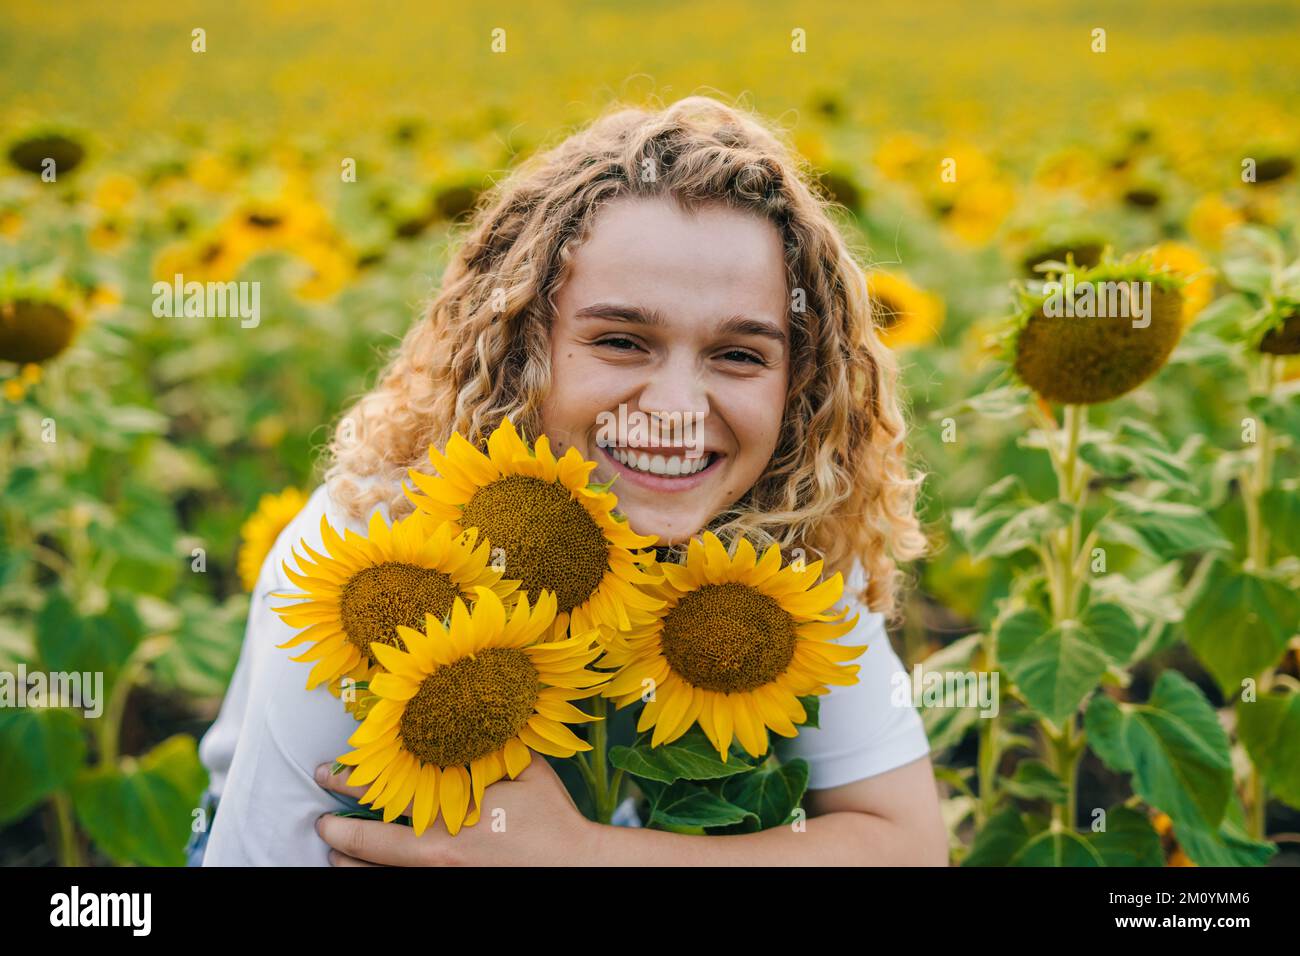 Portrait of a young woman with curly hair enjoying summer in sunflower field at sunset. Beautiful sunset. Smile emotions. Stock Photo